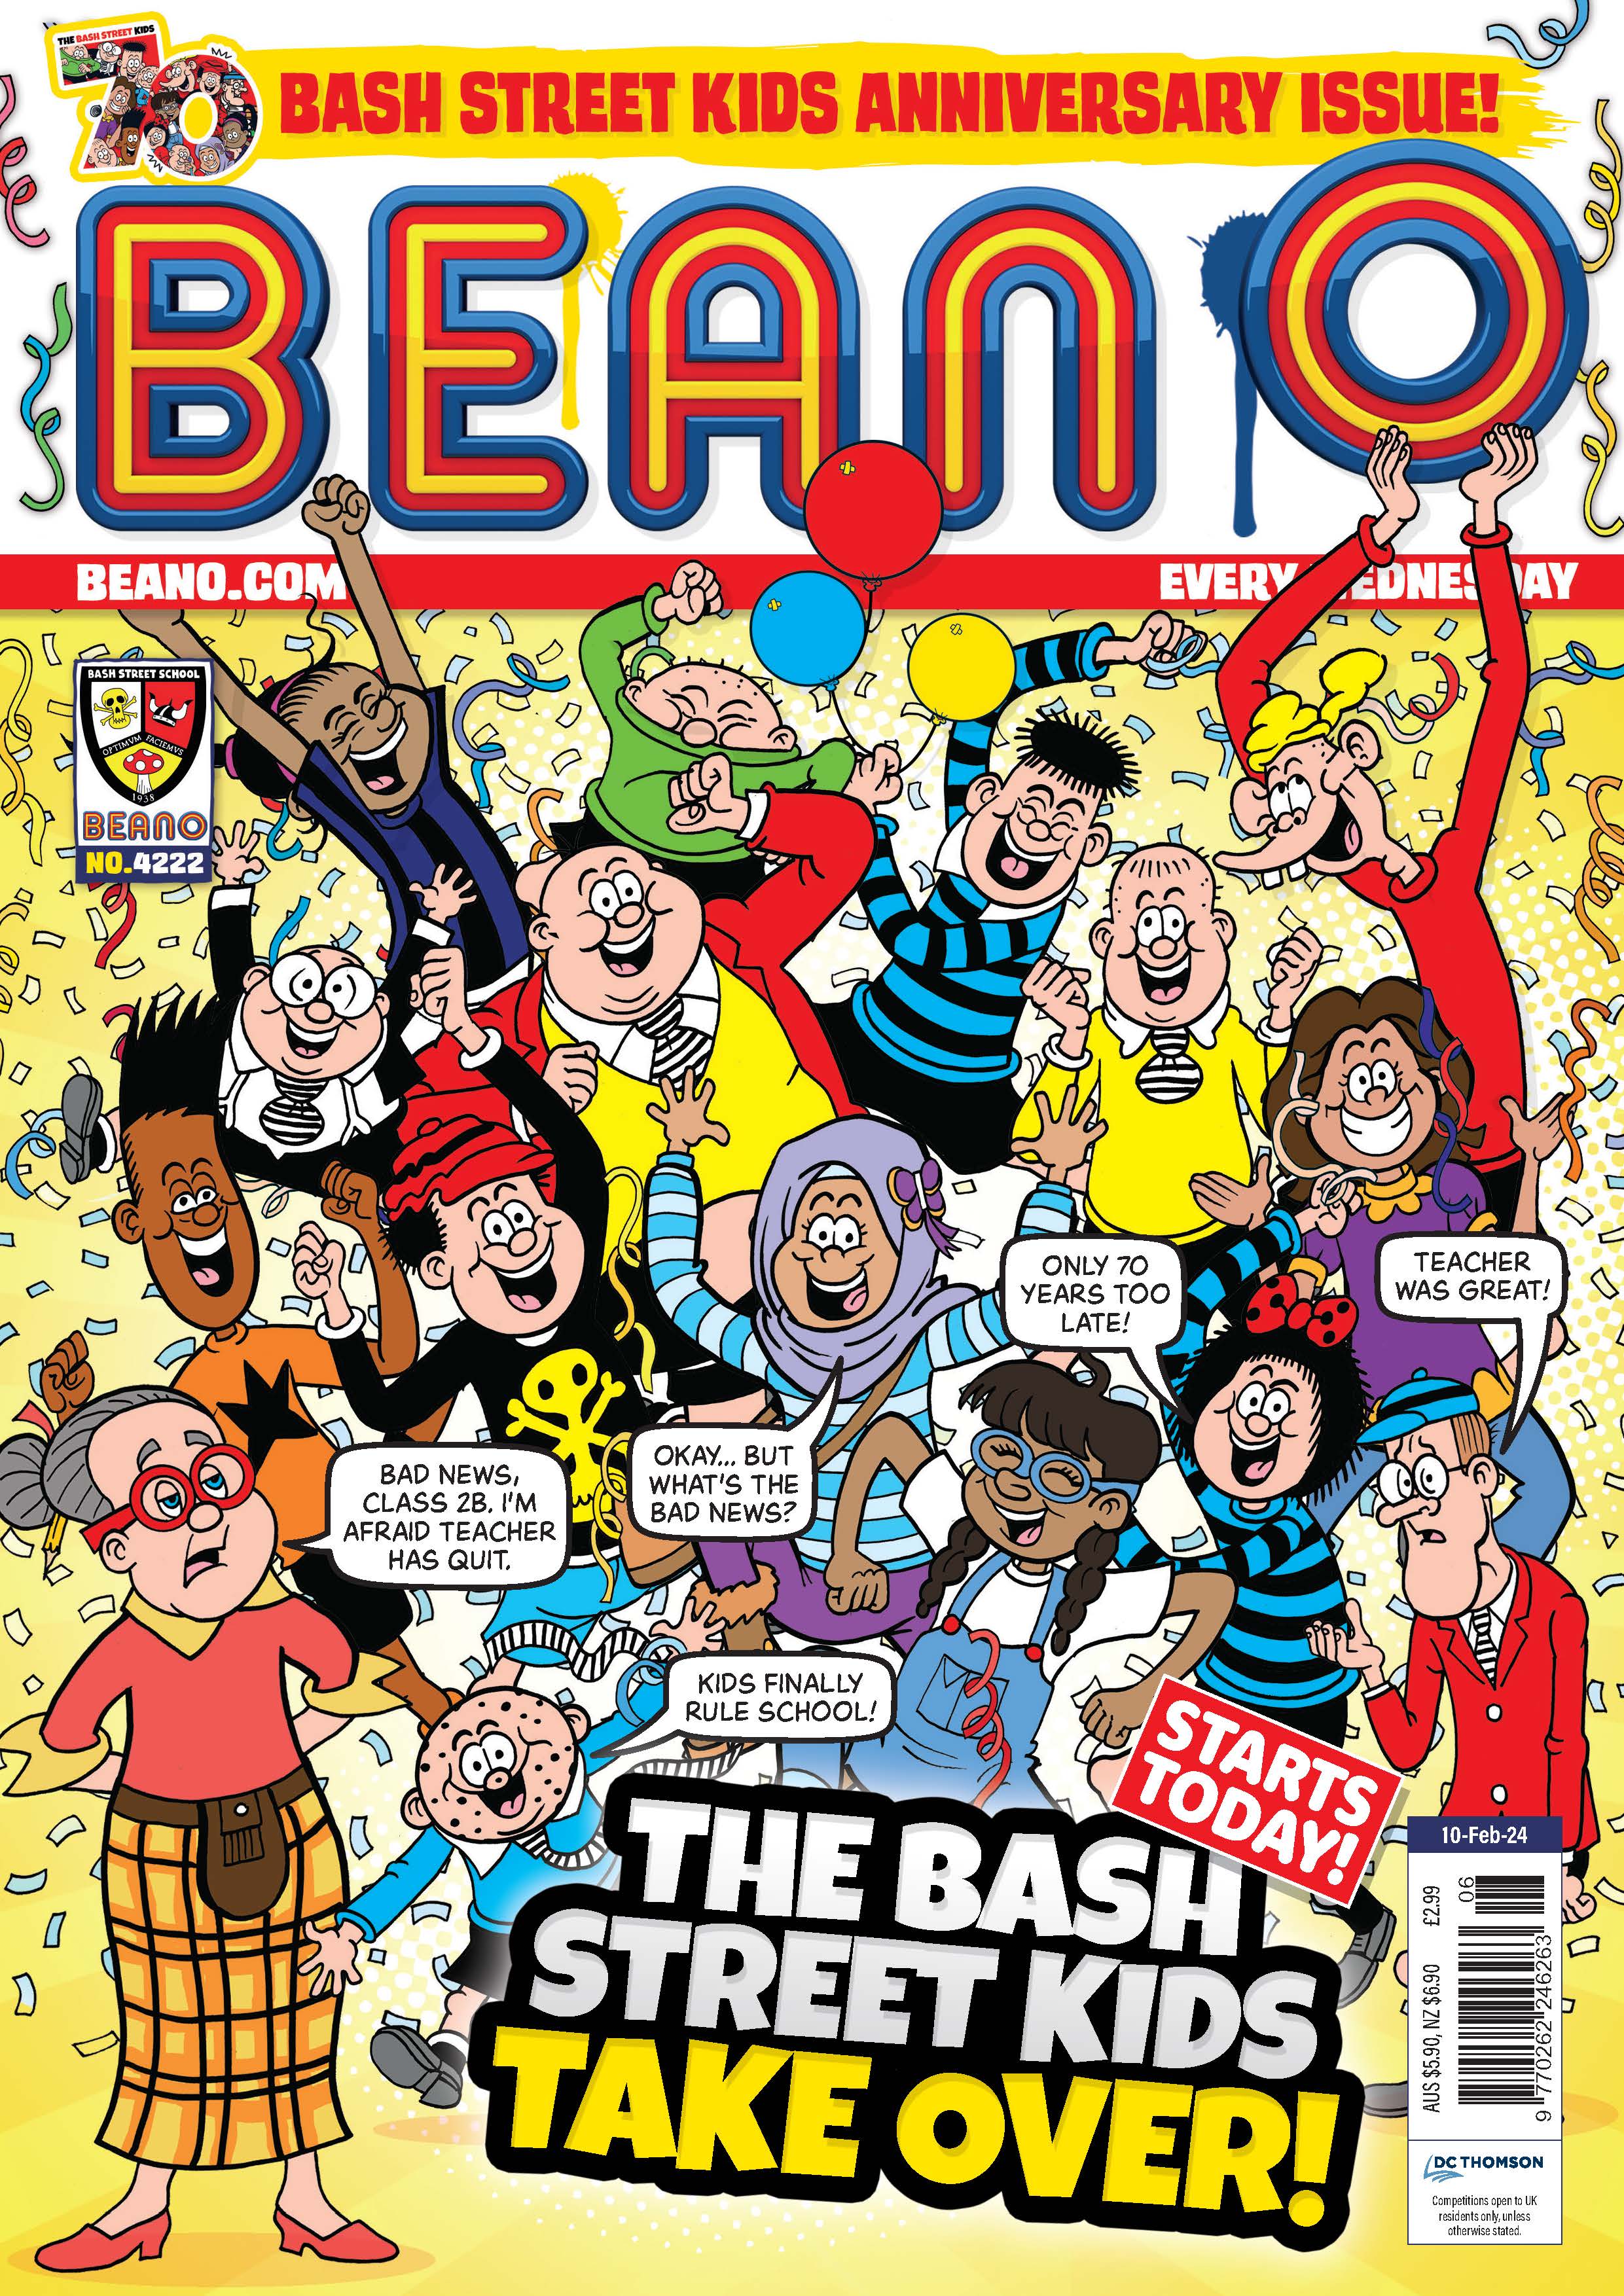 Front cover of The Bash Street Kids’ 70th anniversary cover. 